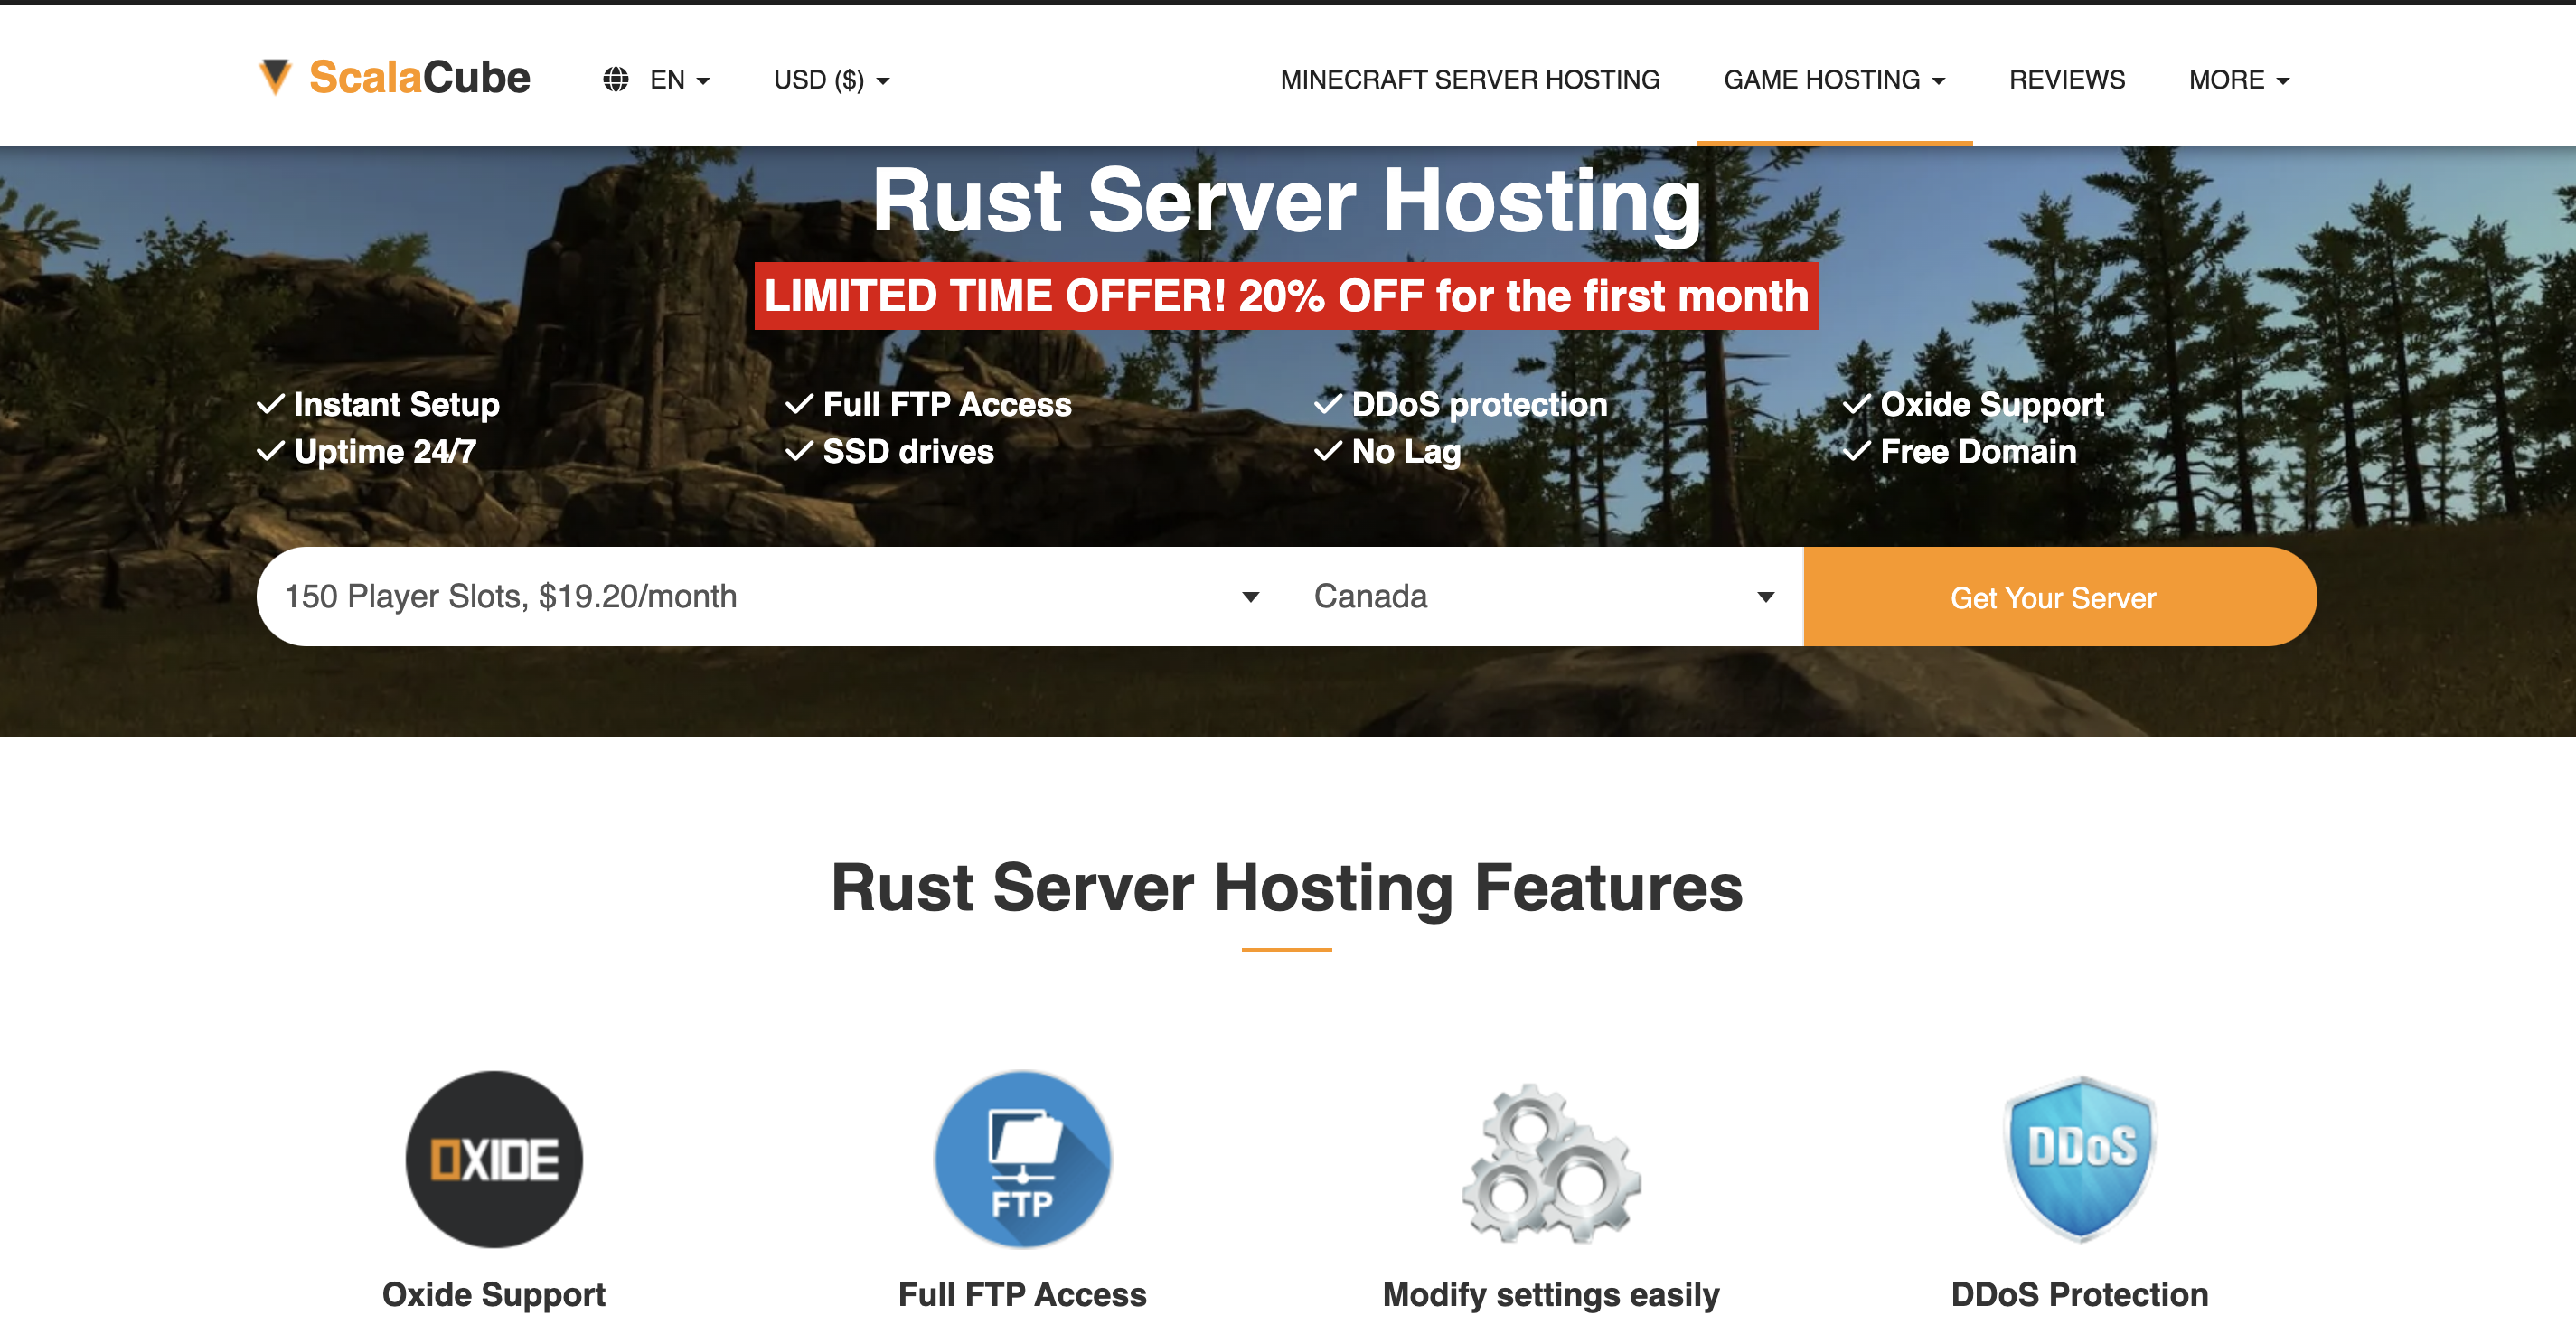 An image of Scalacube's Rust Hosting Hosting page